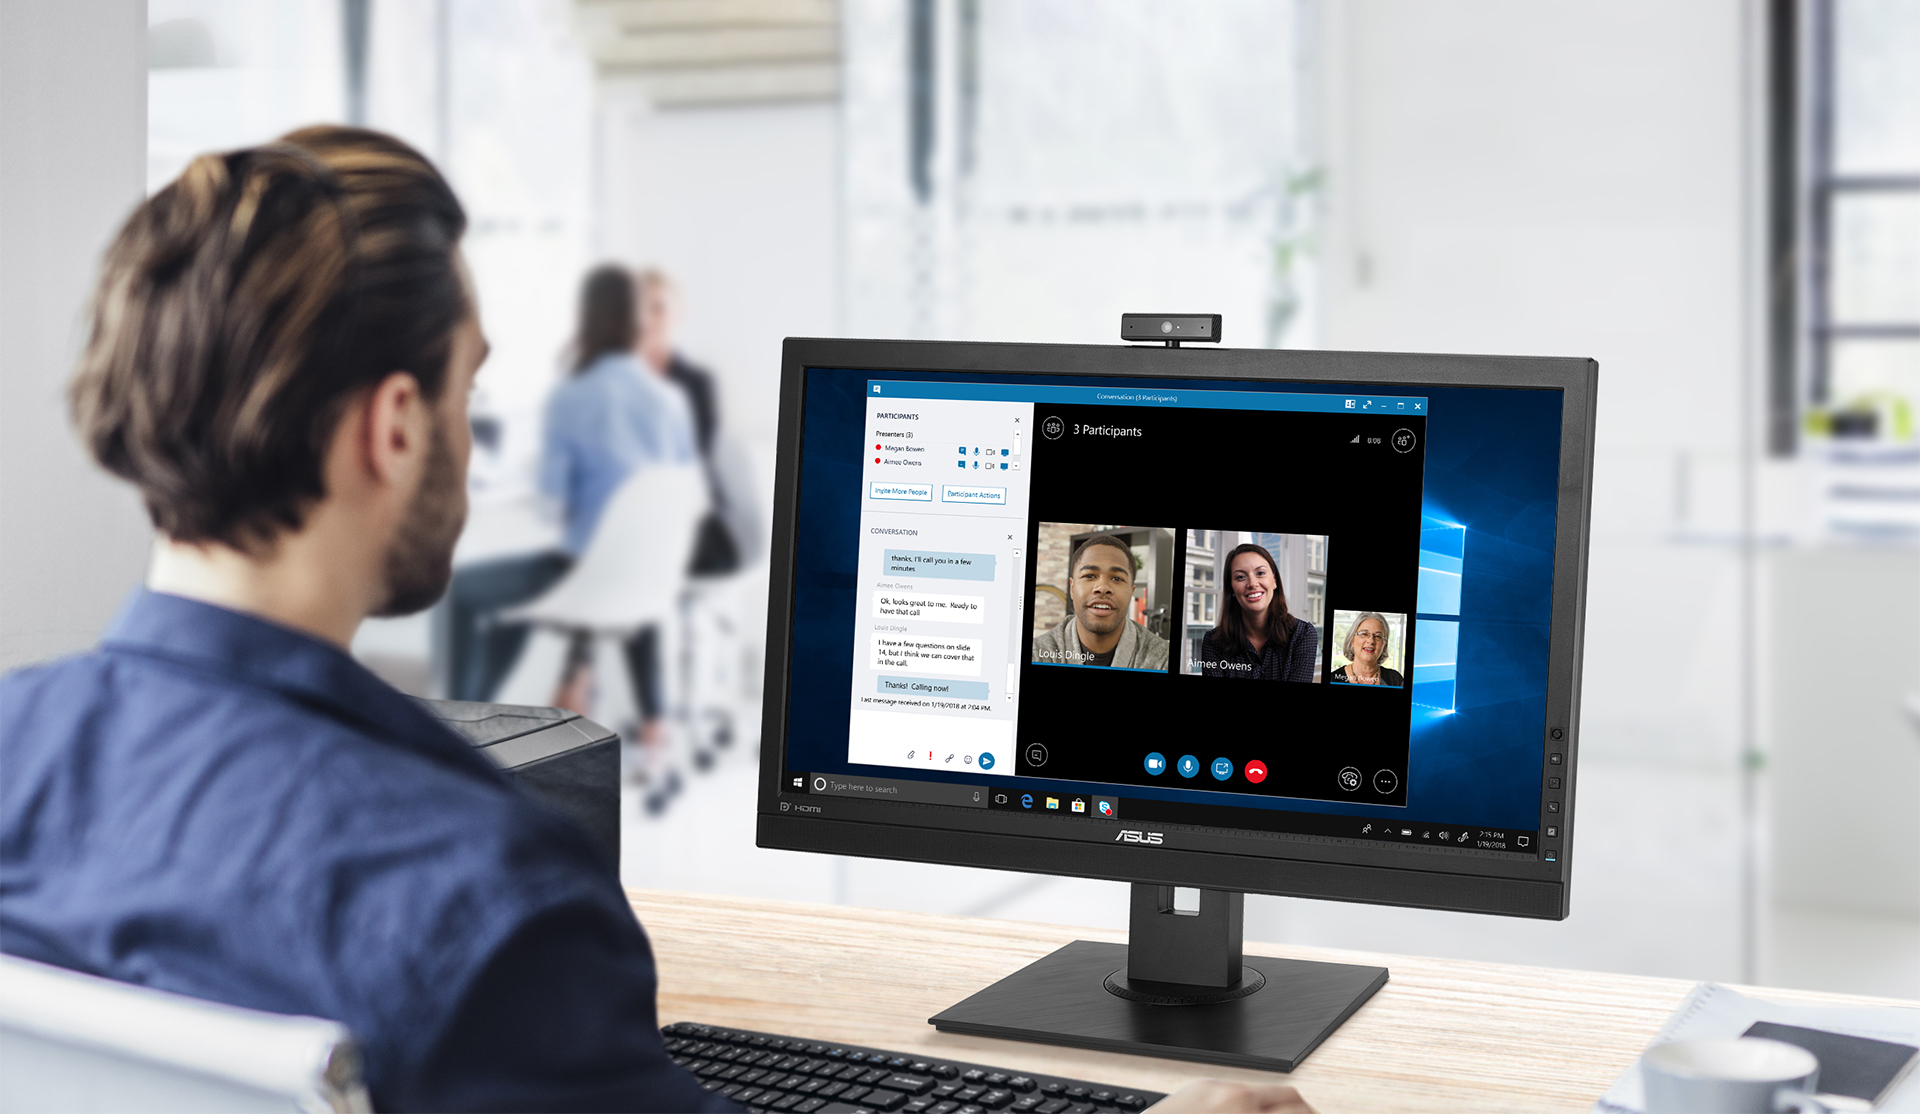 BE24EQSK is a 23.8-inch Full HD monitor that features an integrated Full HD (2MP) webcam, microphone array and stereo speakers for video conferencing and live-streaming.